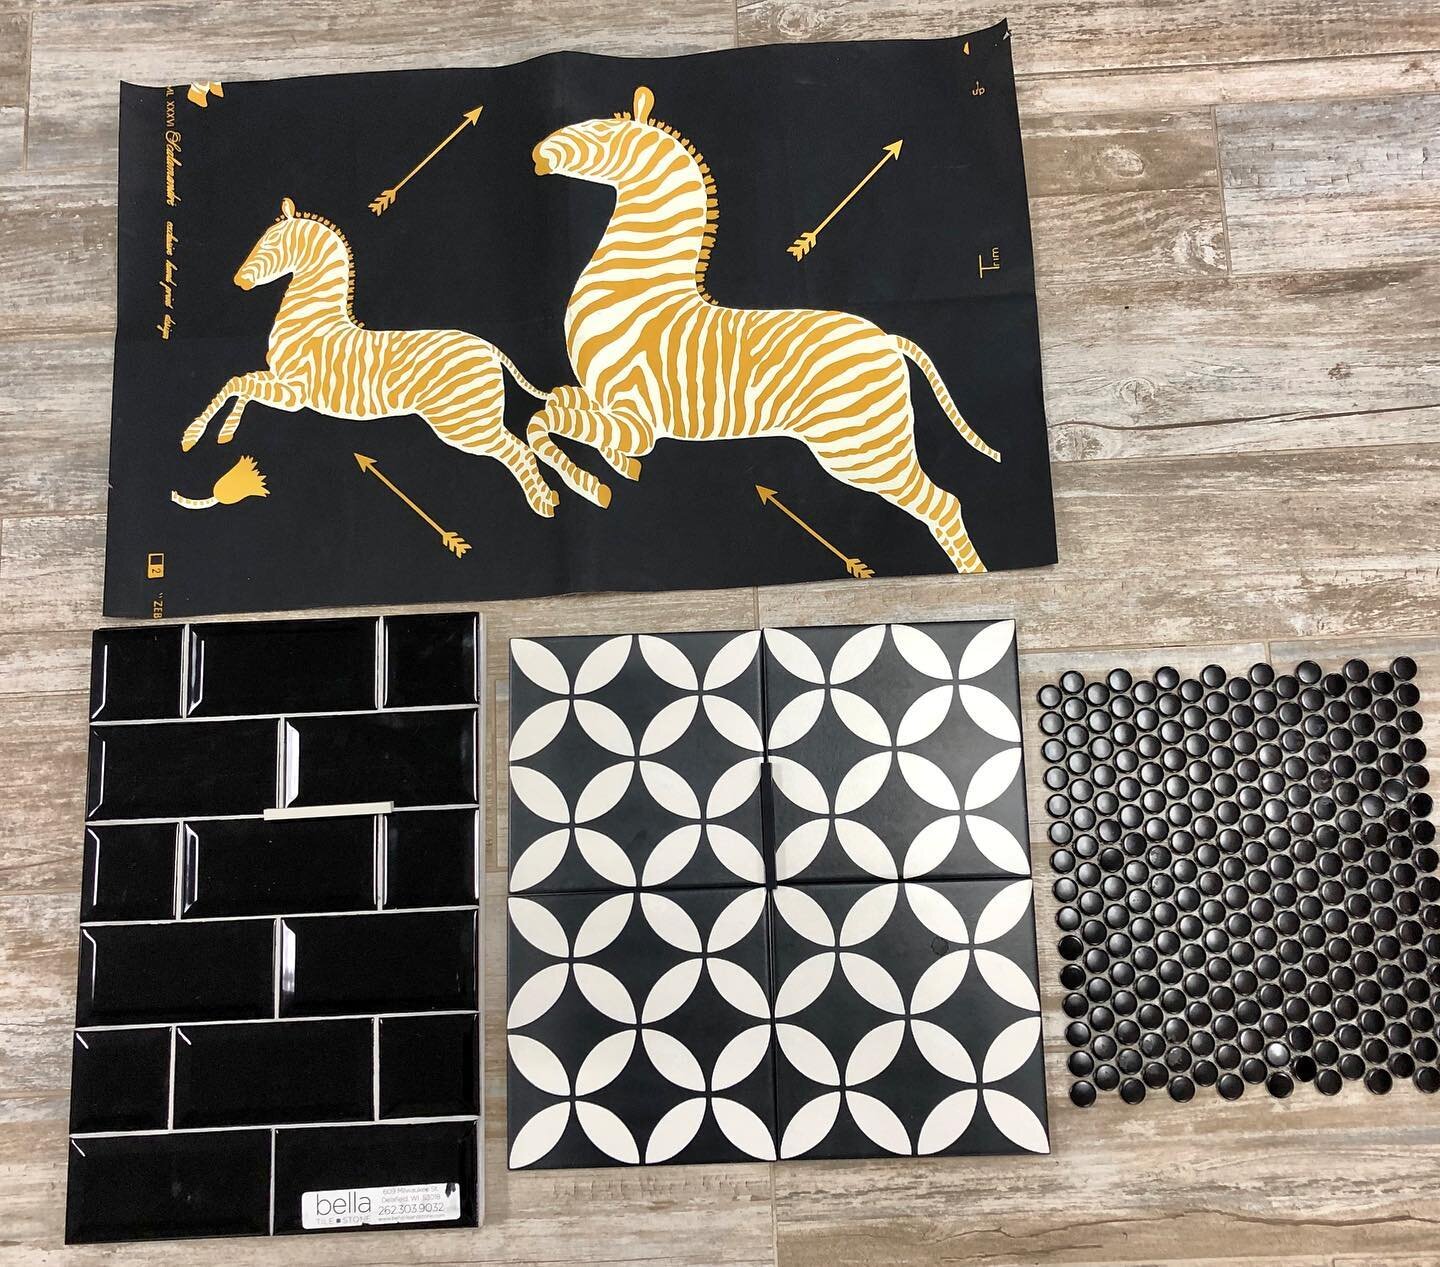 Art Decco inspired Bathroom selections meeting today was a success.  Can&rsquo;t wait to see this come to life with a custom Teal colored vanity, stunning Art Deco lighting and brushed brass fixtures. 

.
.
.

#tileobsessed #designobsessed
#tileaddic